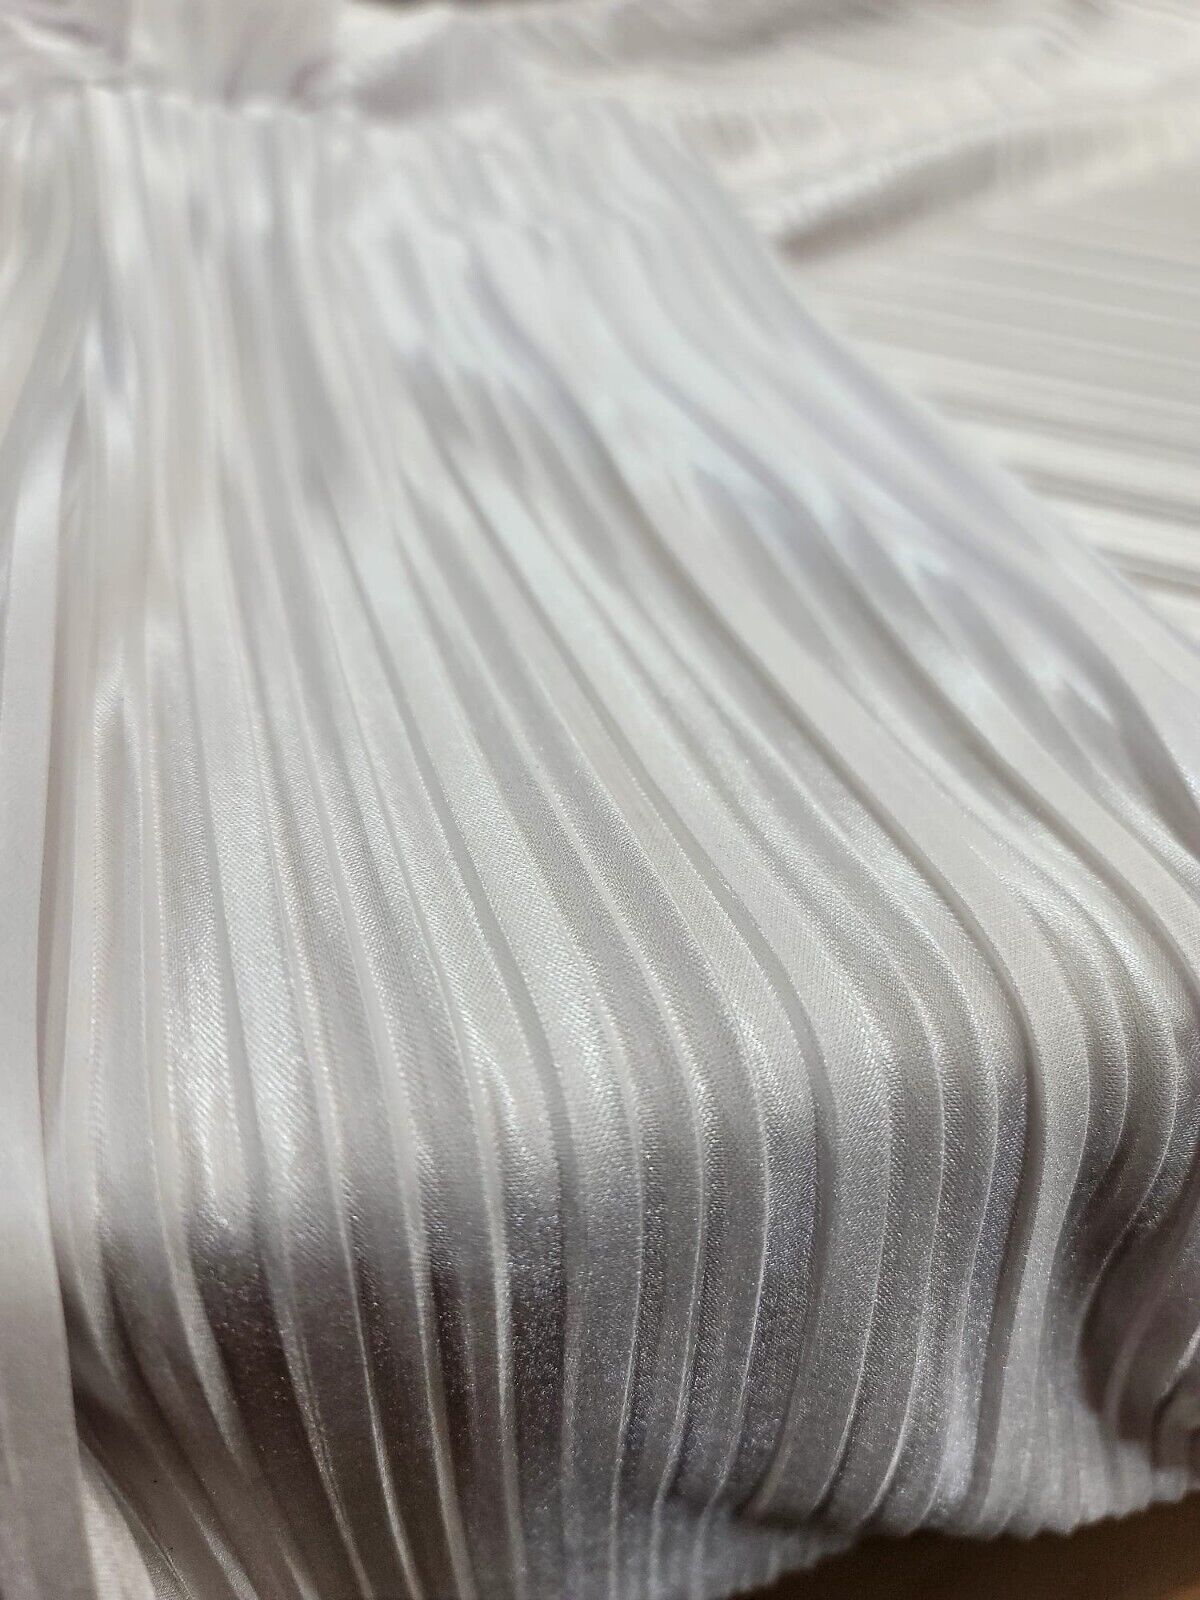 White Pleated Stretch Fashion Fabric - Sold by the Yard